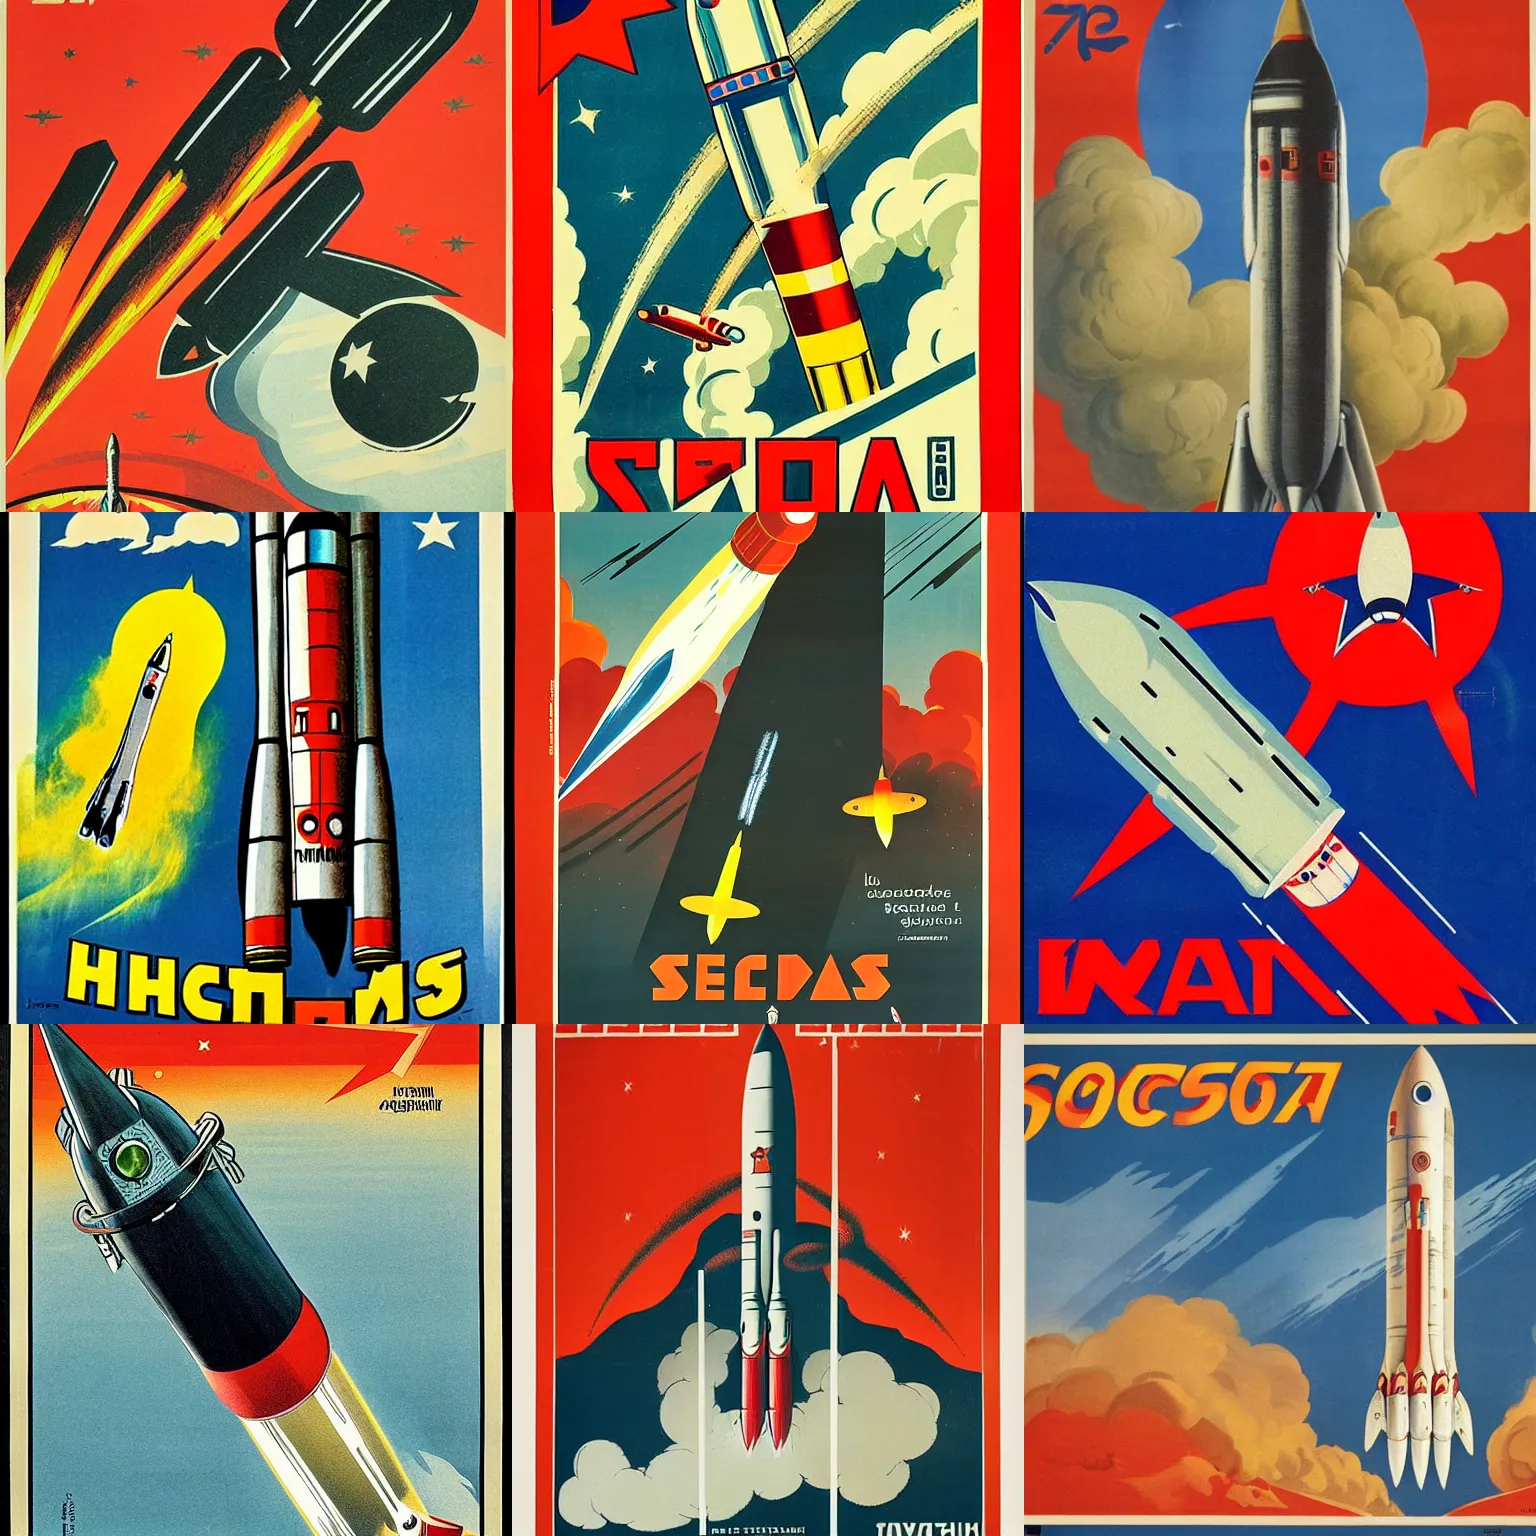 Prompt: A Soviet propaganda poster featuring a rocket traveling to Mars